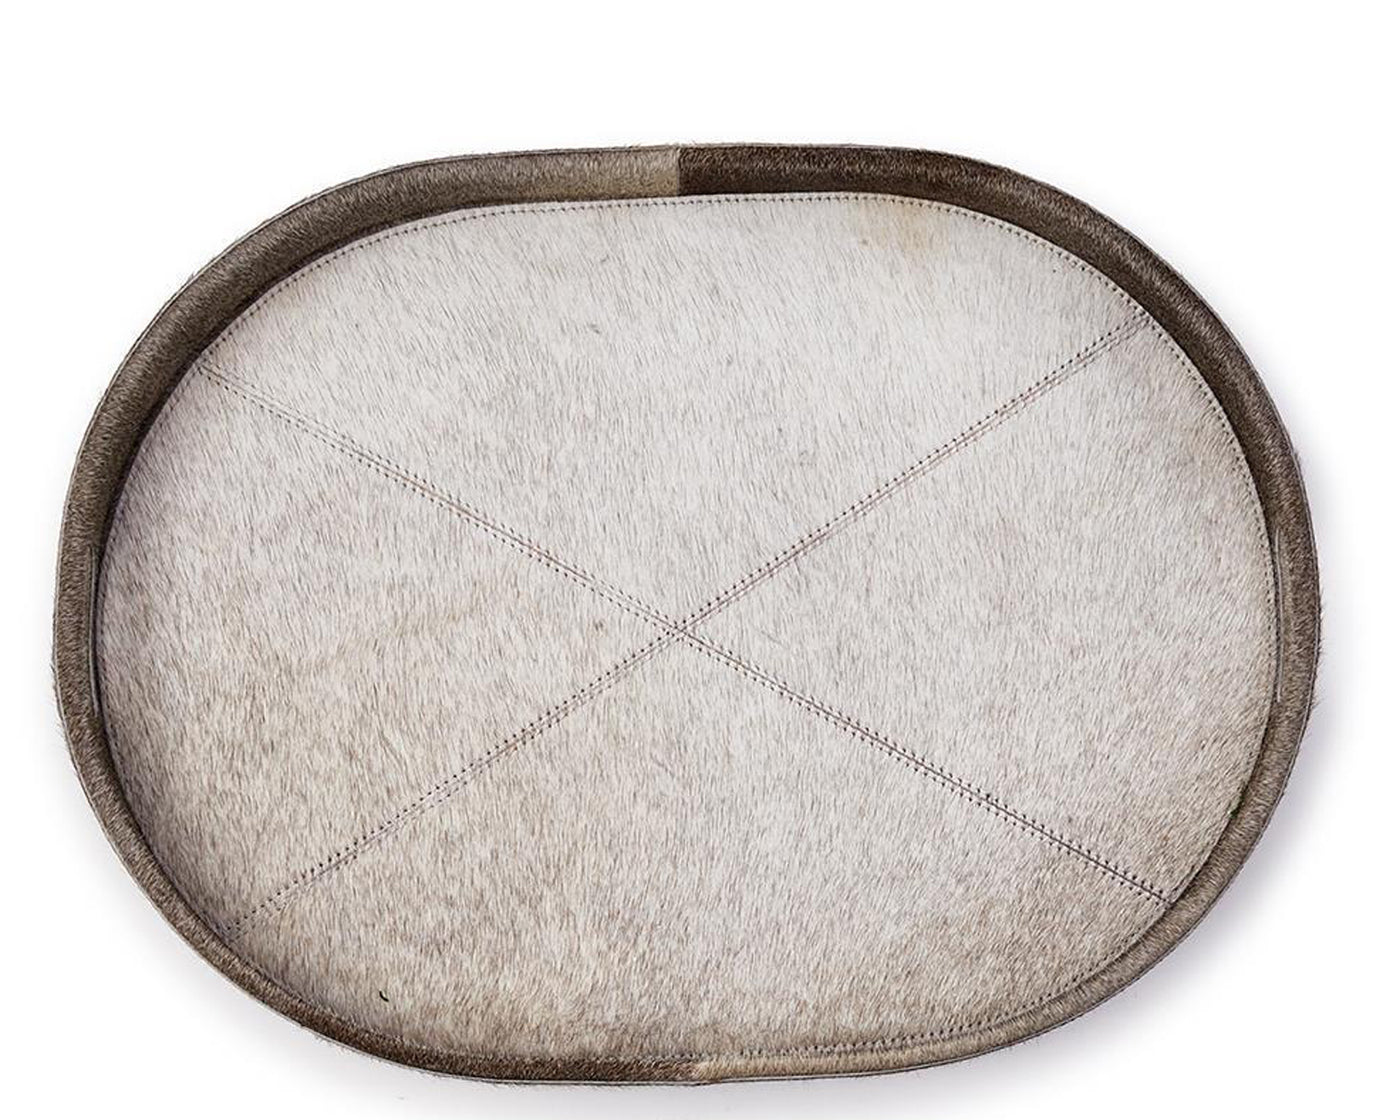 TRAY COWHIDE NESTED GREY (Available in 2 Sizes)